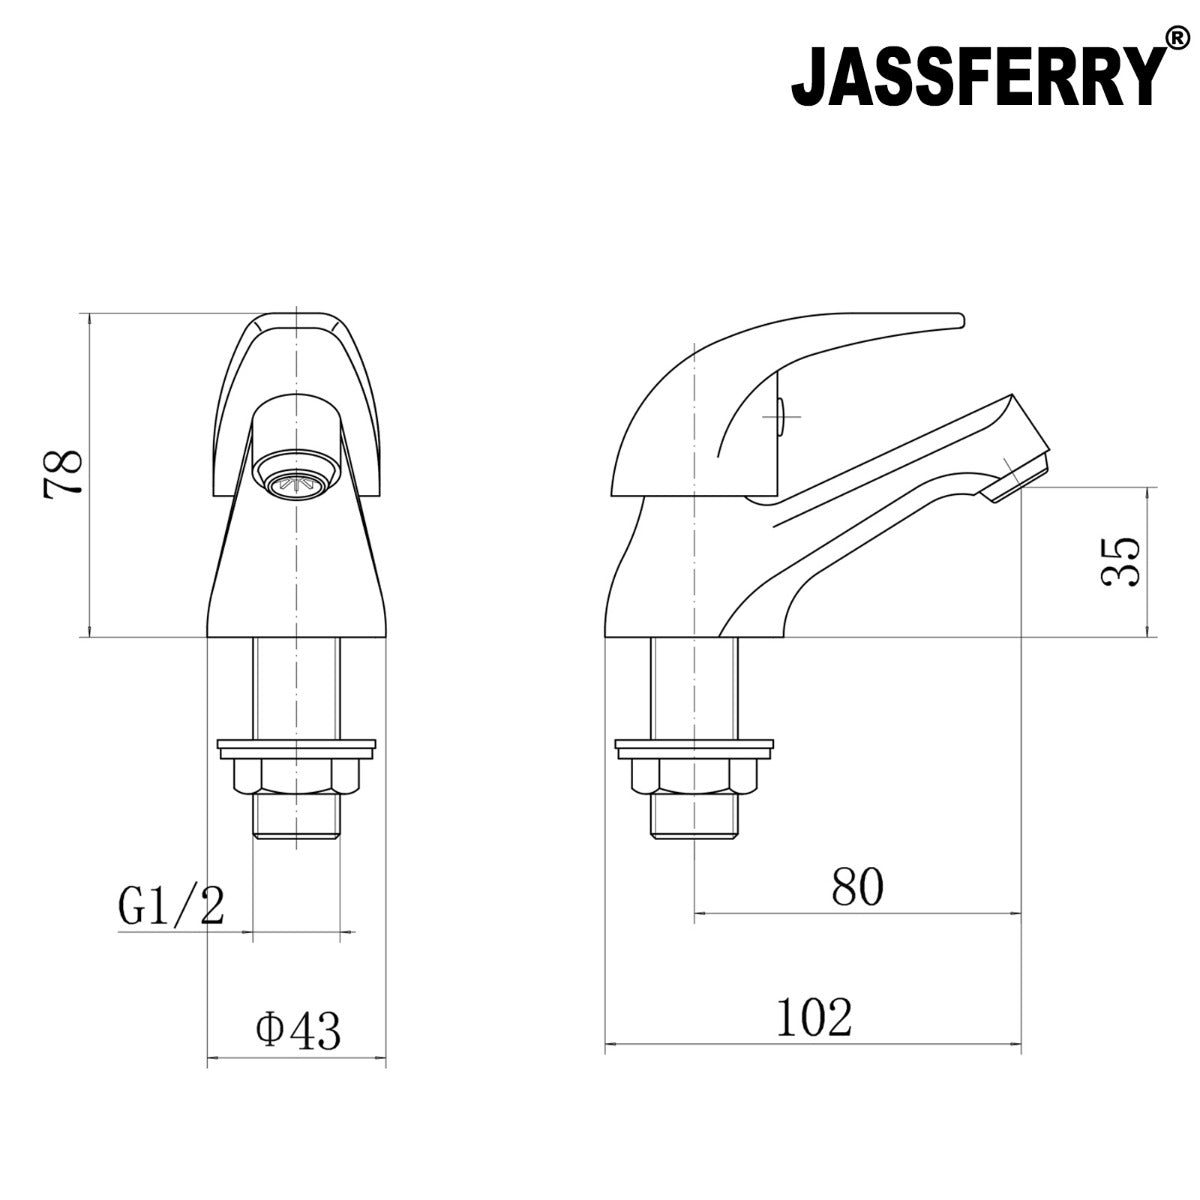 JassferryJASSFERRY Bathroom Sink Taps Lever Basin Taps Chrome-Plated Hot and Cold WaterBasin Taps